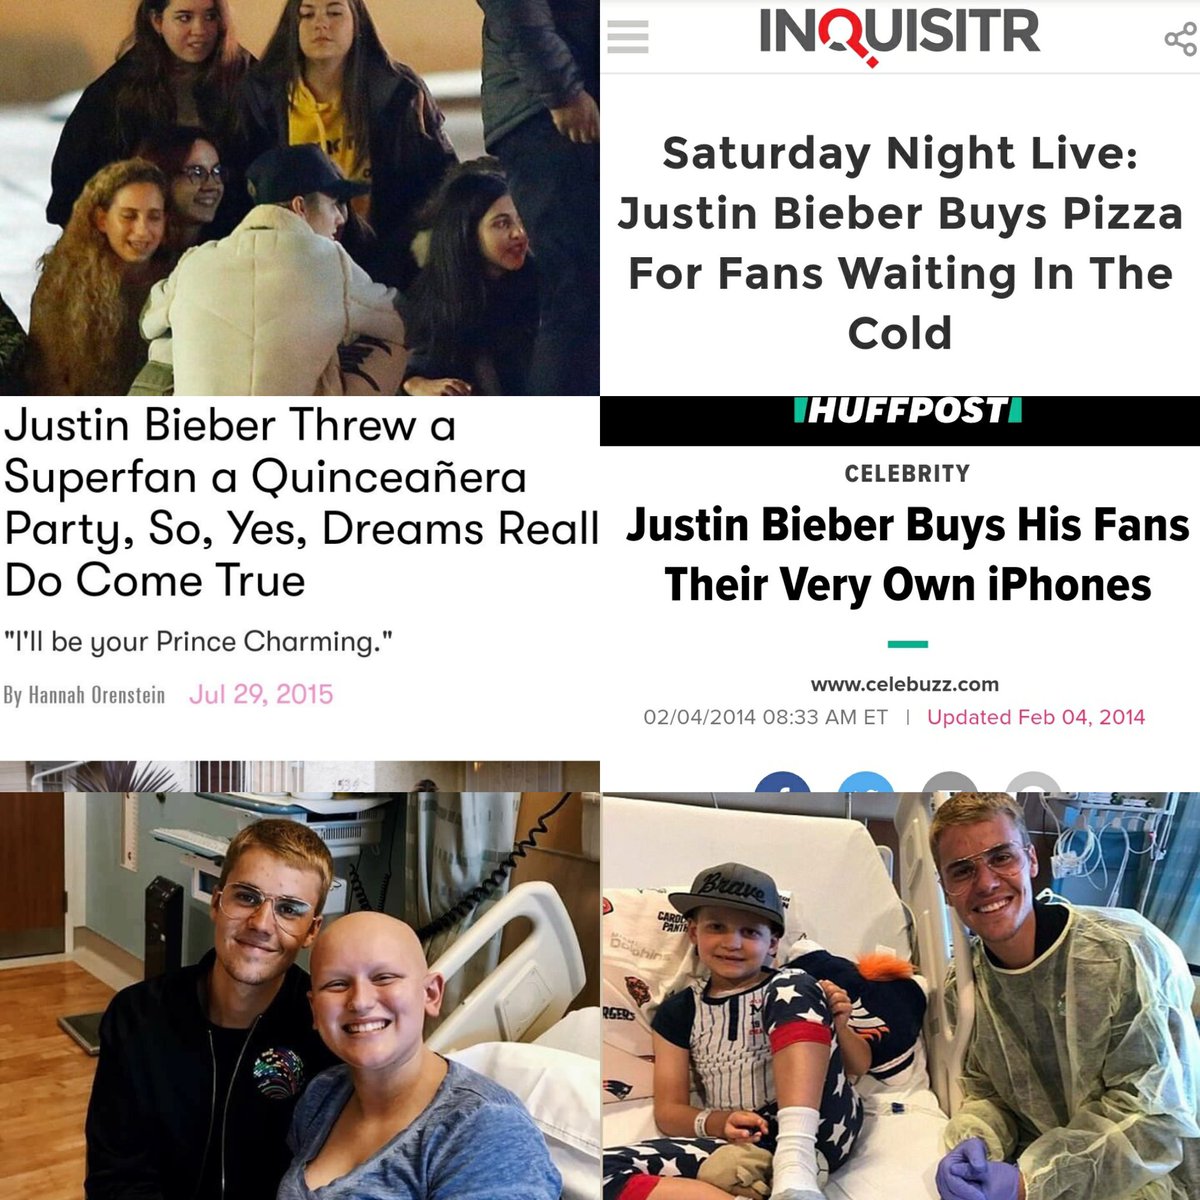 Although haters like to claim otherwise, Justin always had special connection and adored his fans. He is a celebrity who made most Make a wish wishes come true but he also always showed love with random acts of kindness. But often he is treated badly by "fans"...